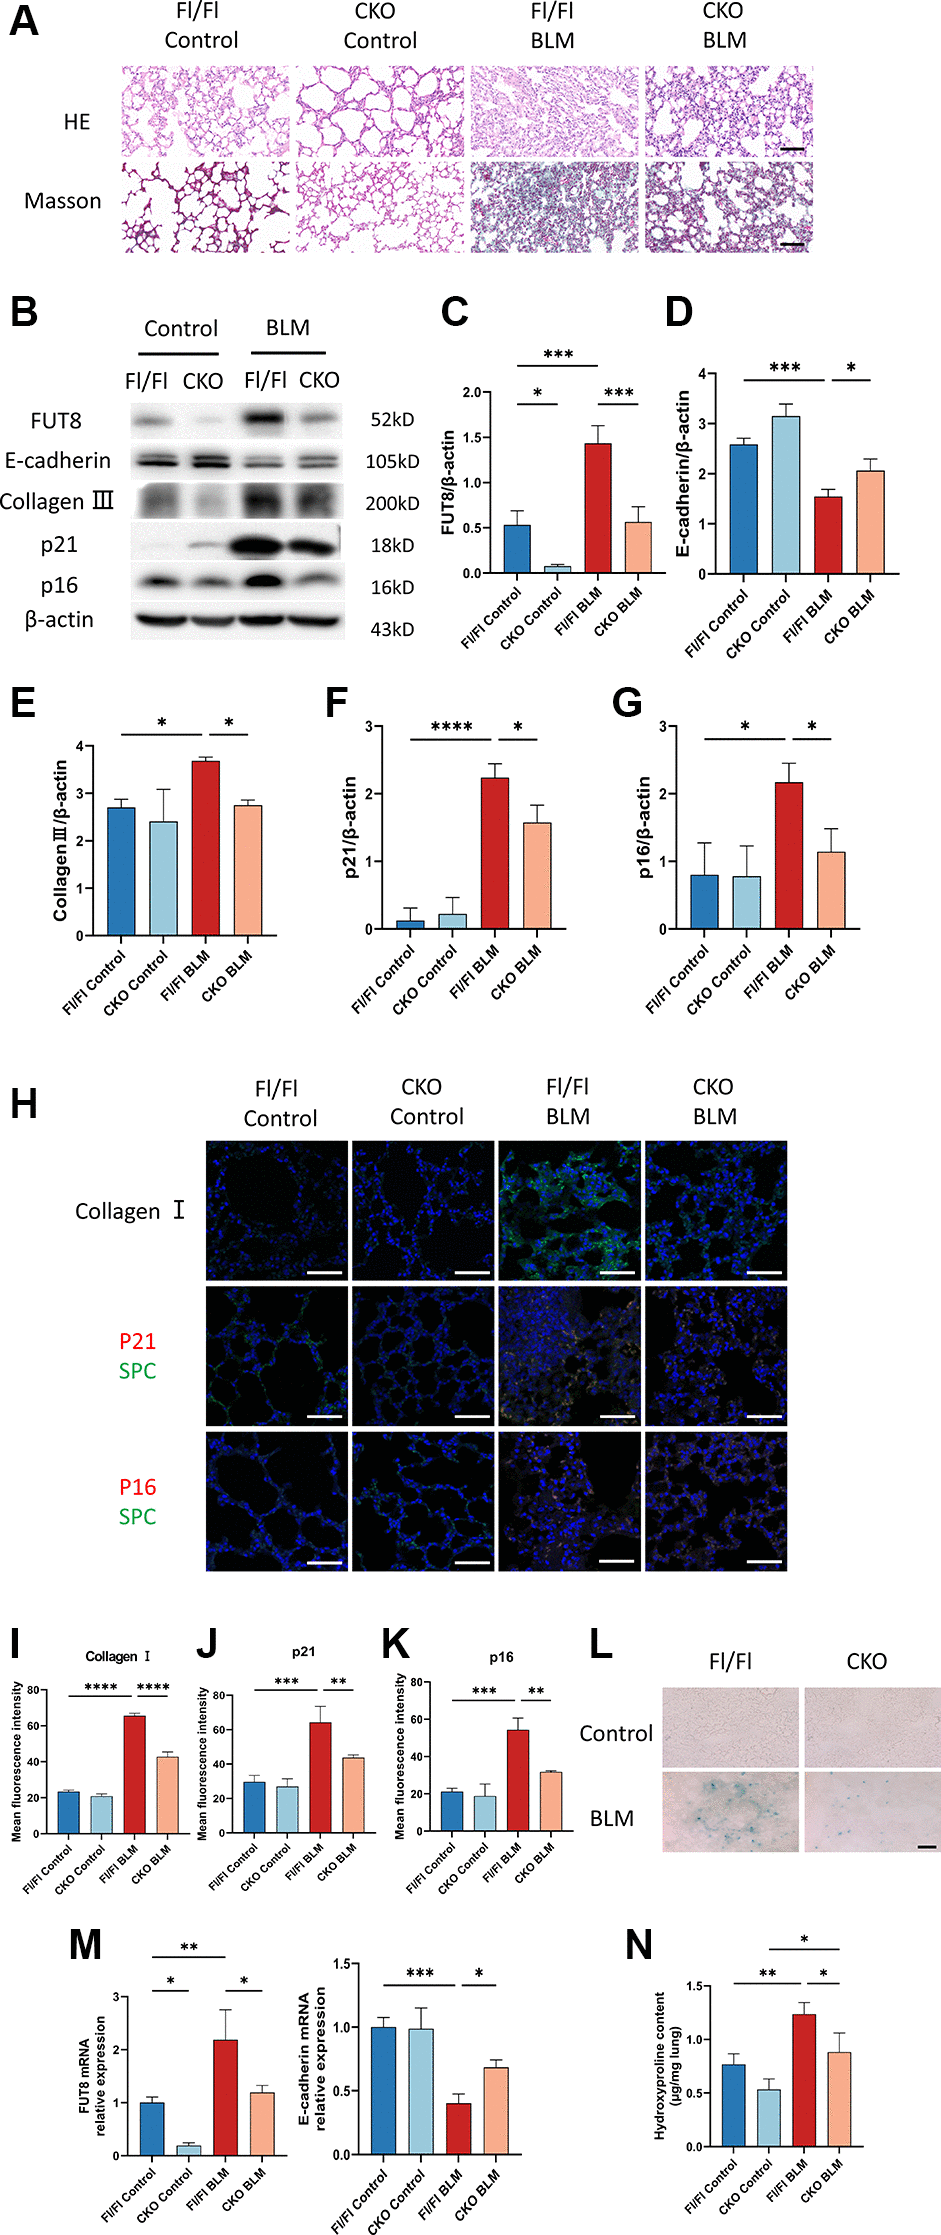 CKO mice inhibit BLM-induced cellular senescence and ameliorate lung fibrosis in vivo. (A) CKO mice and Fl/Fl mice were treated with BLM for 21 days. HE and Masson staining reveal representative images of different lung tissue sections. Scale bar, 100 μm. (B–G) Western blotting using anti-FUT8, anti-E-cadherin, anti-collagen III, anti-p21, anti-p16, and anti-β-actin antibodies. Densitometric analyses of the bands were adjusted to be equal to β-actin. Data were presented as the mean ± SD. *P ***P ****P H–K) The protein levels of collagen I in different mice were measured via immunofluorescence technique. Representative immunofluorescence shows colocalization of p21WAF1 or p16ink4a (Red) and SPC (Green) in the lung tissue of different mice. Scale bar 50 μm. Data were presented as the mean ± SD. **P ***P ****P L) SA-β-gal staining reveals indicative pictures of different lung tissue sections. Scale bar, 100 μm. (M) RT-PCR revealed FUT8 and E-cadherin mRNAs expression in different groups. Data were presented as the mean ± SD. *P **P ***P N) Hydroxyproline content of lung tissues. Data were presented as the mean ± SD. *P **P 